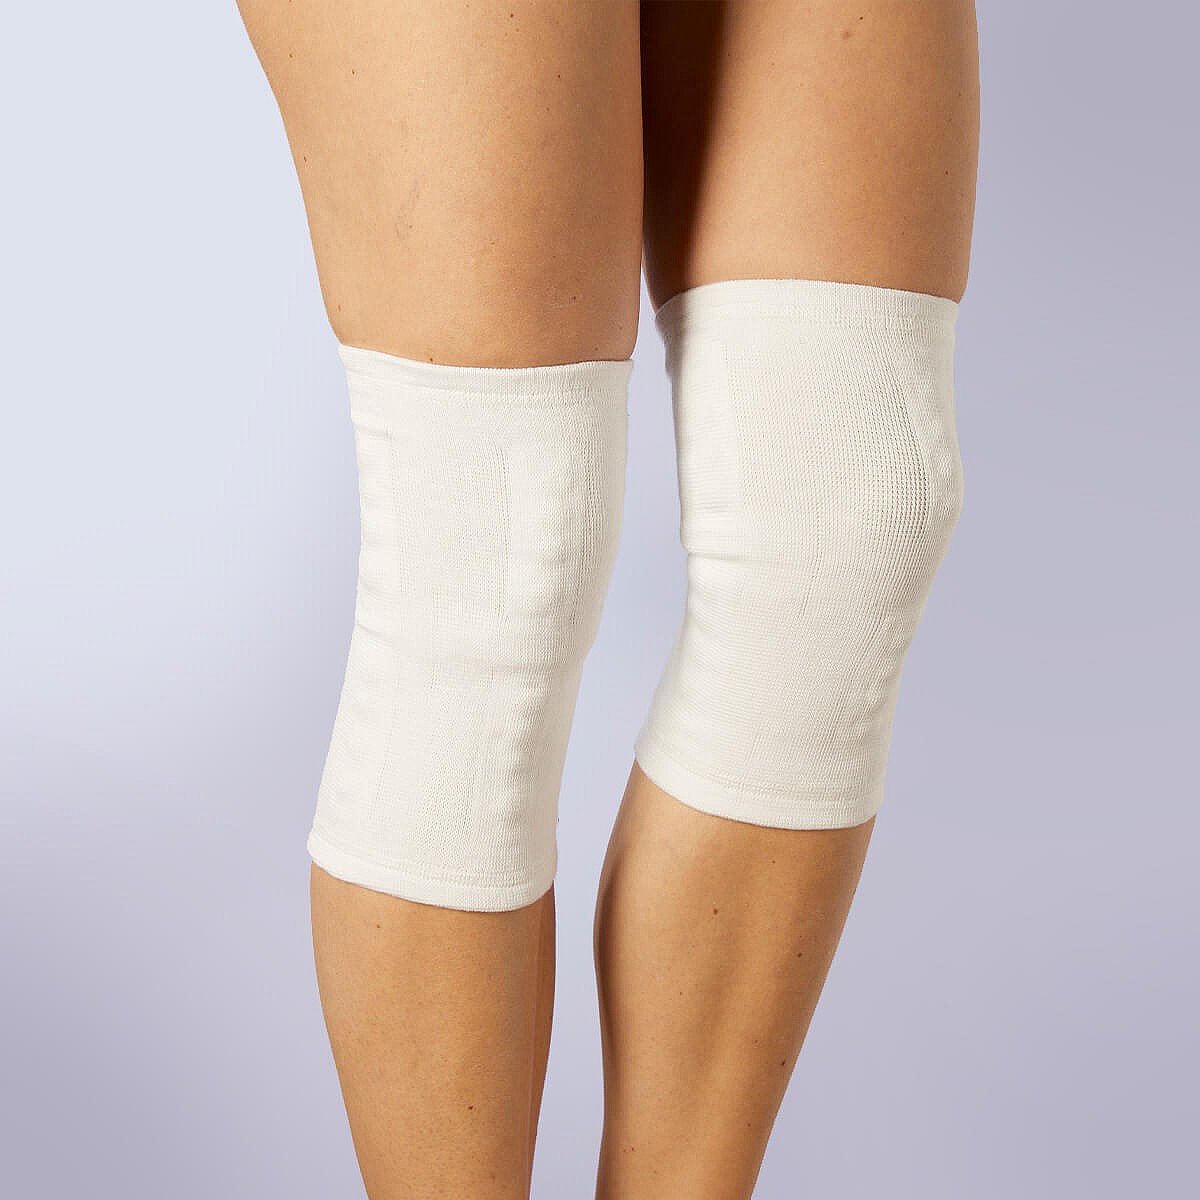 Magnetic Knee Support - Buy 2 & Save £6